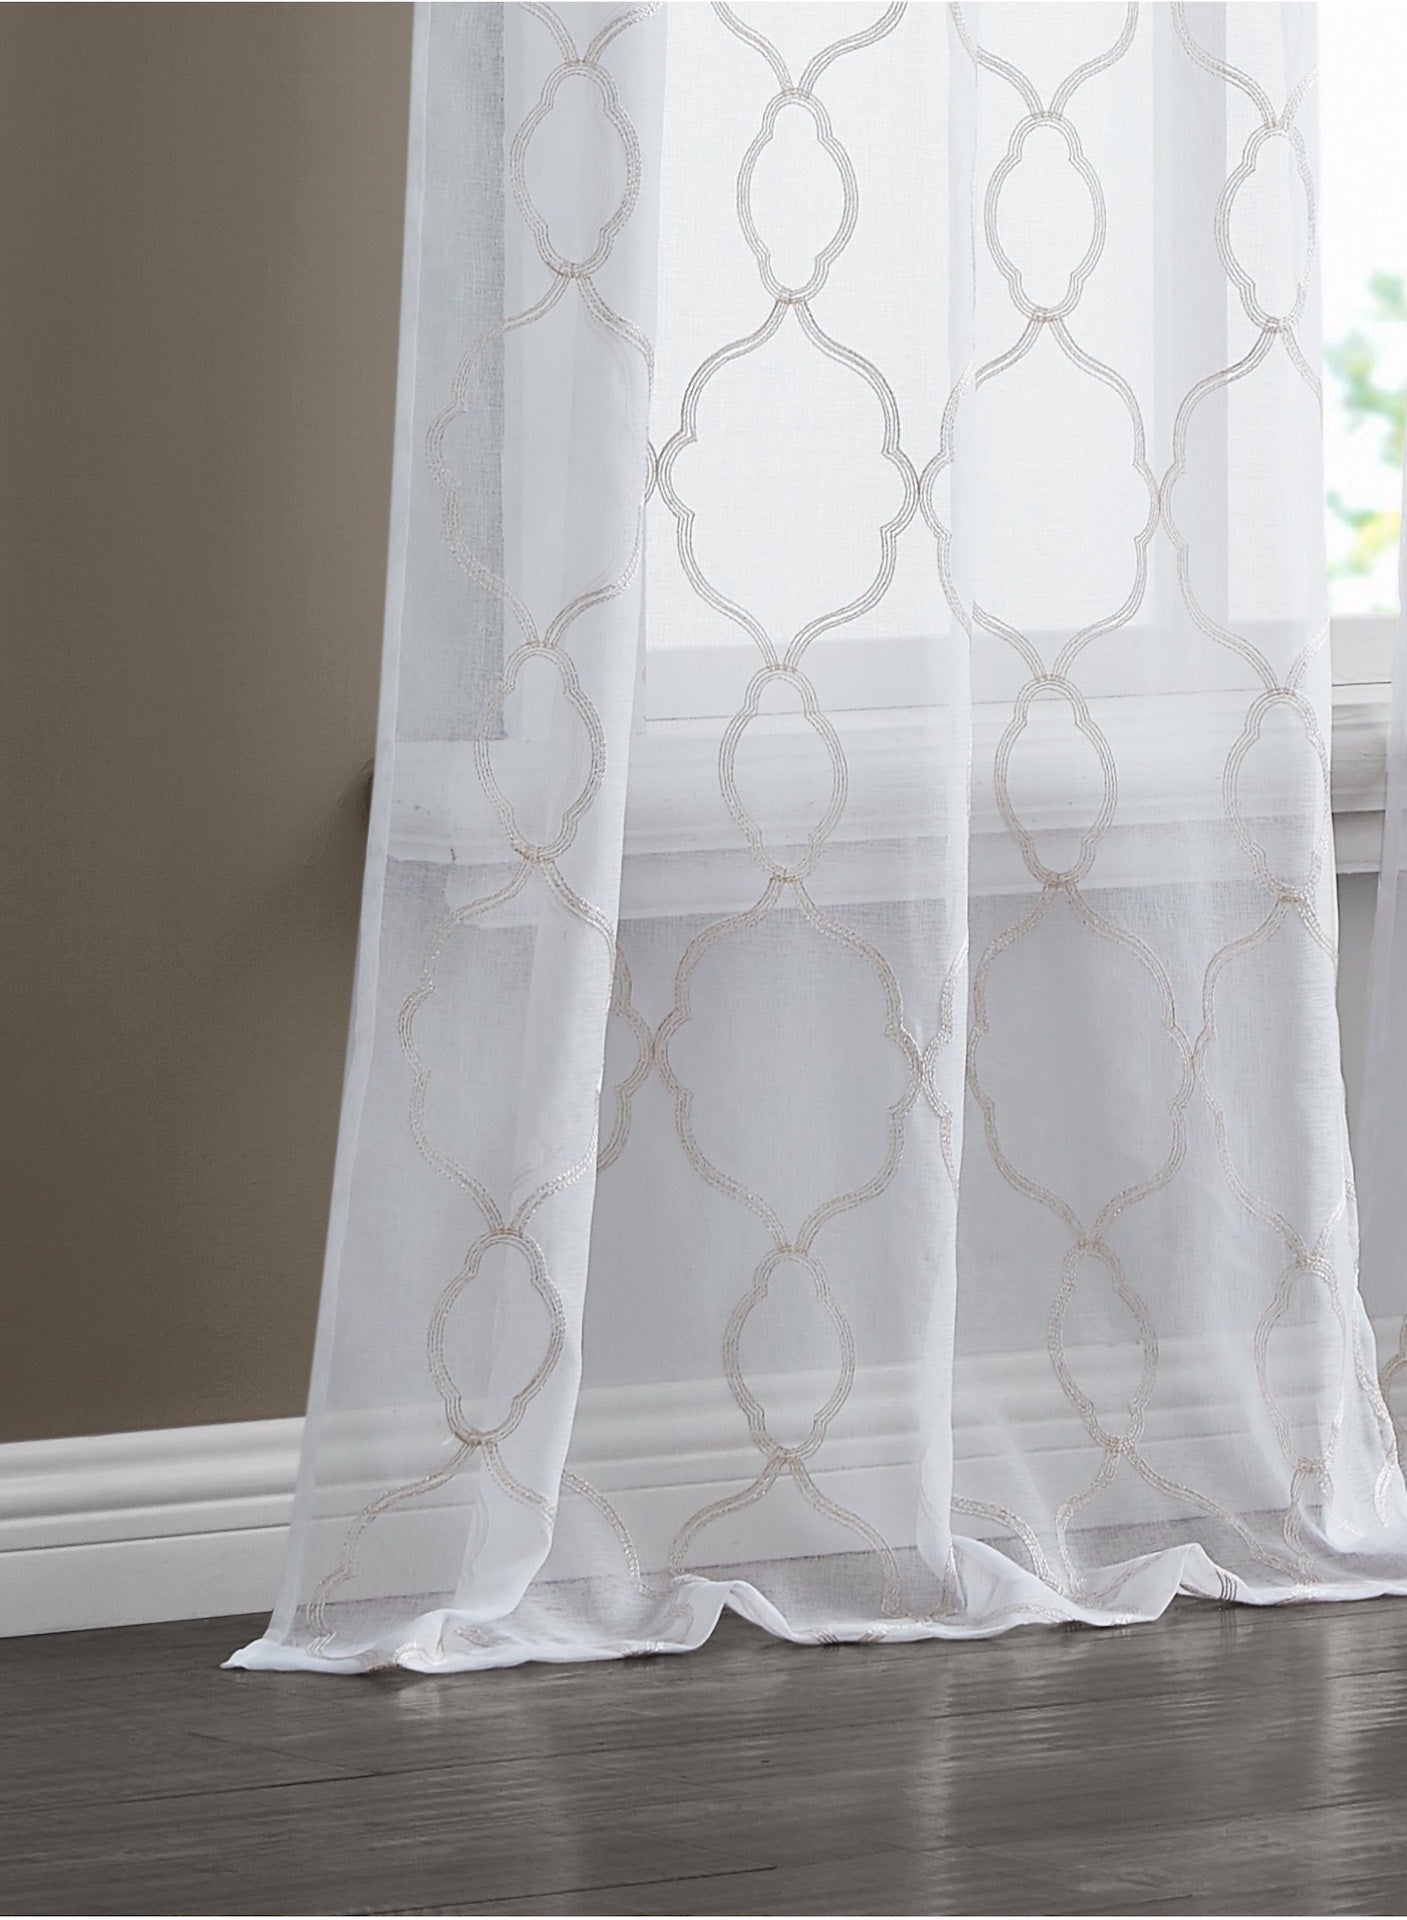 Dainty Home Springfield Contemporary 3D Lurex Embroidered Textured Sheer Grommet Single Panel